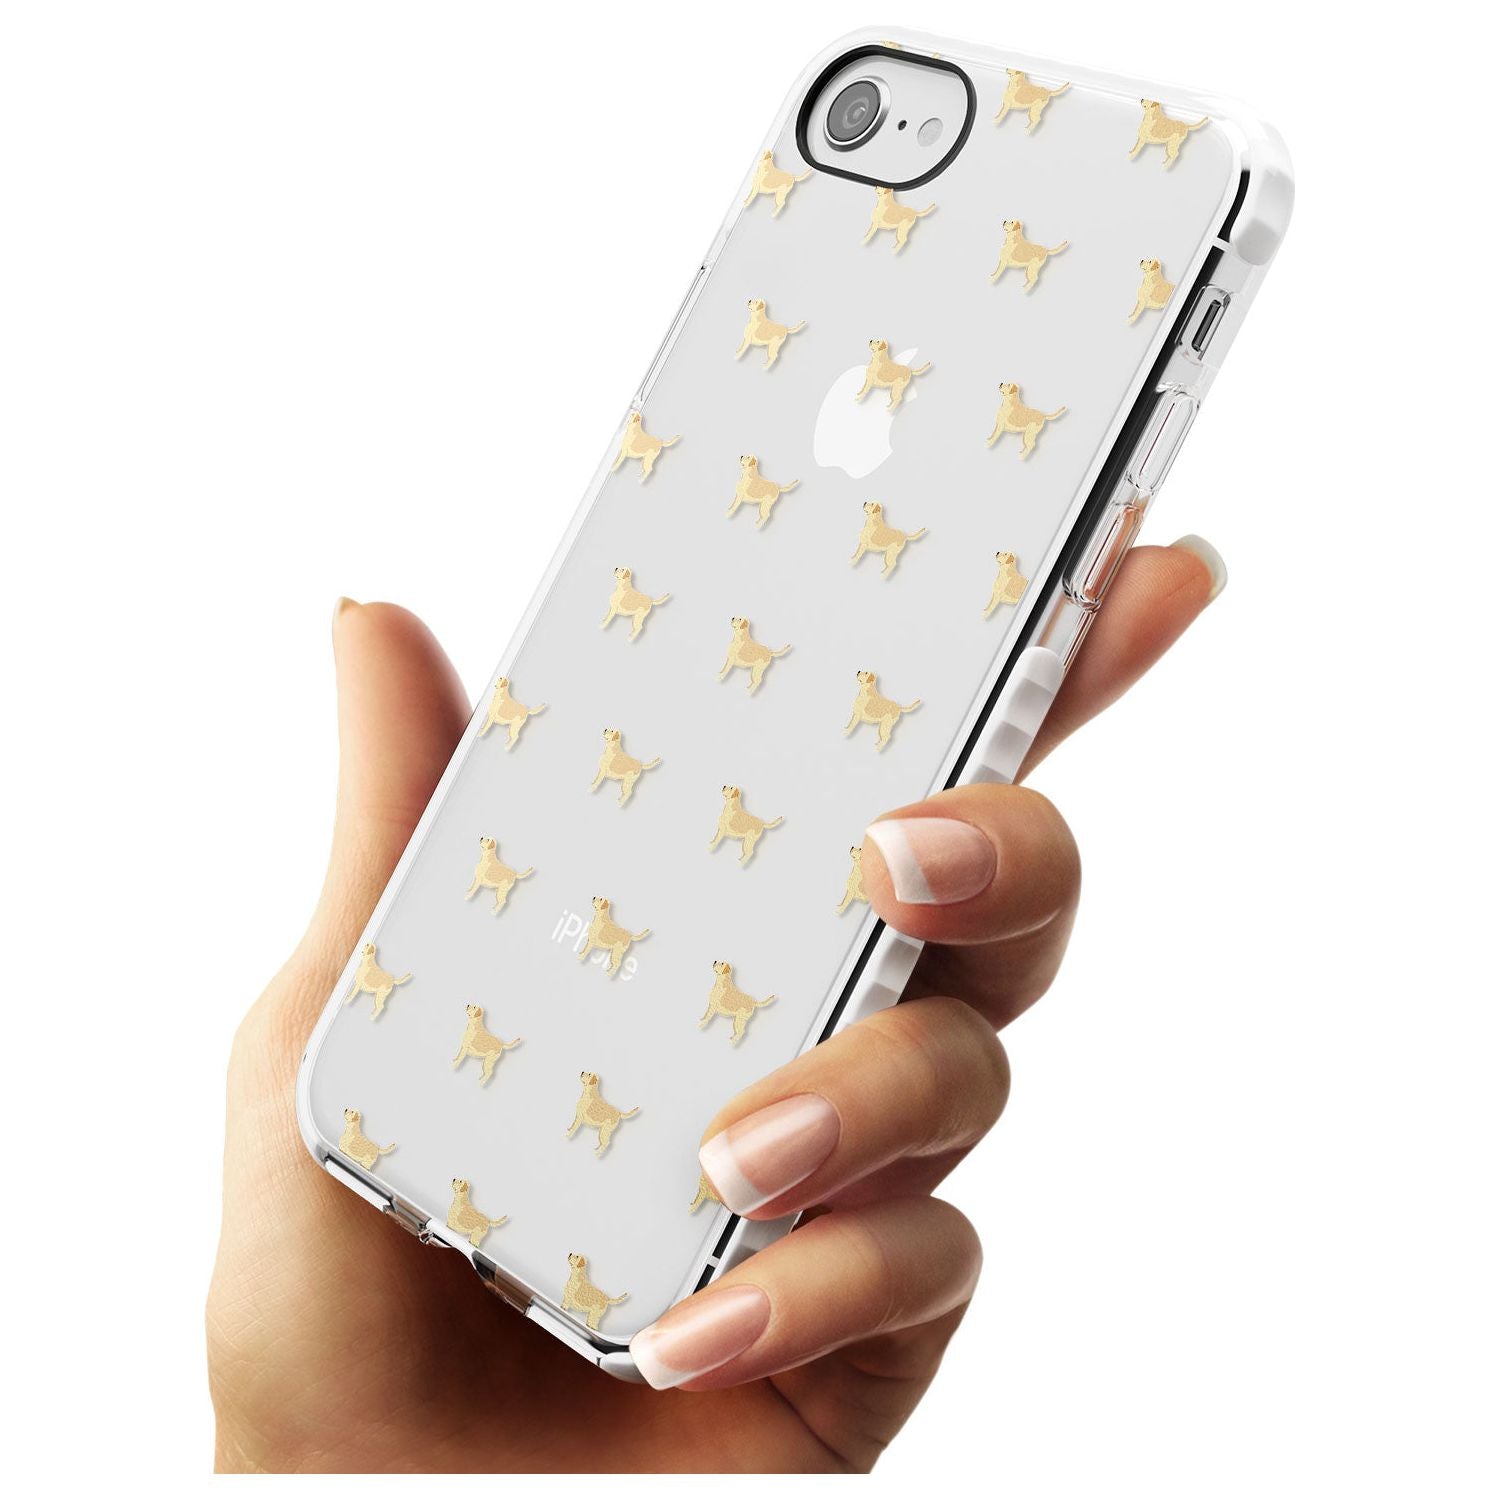 Tan Labrador Dog Pattern Clear Impact Phone Case for iPhone SE 8 7 Plus